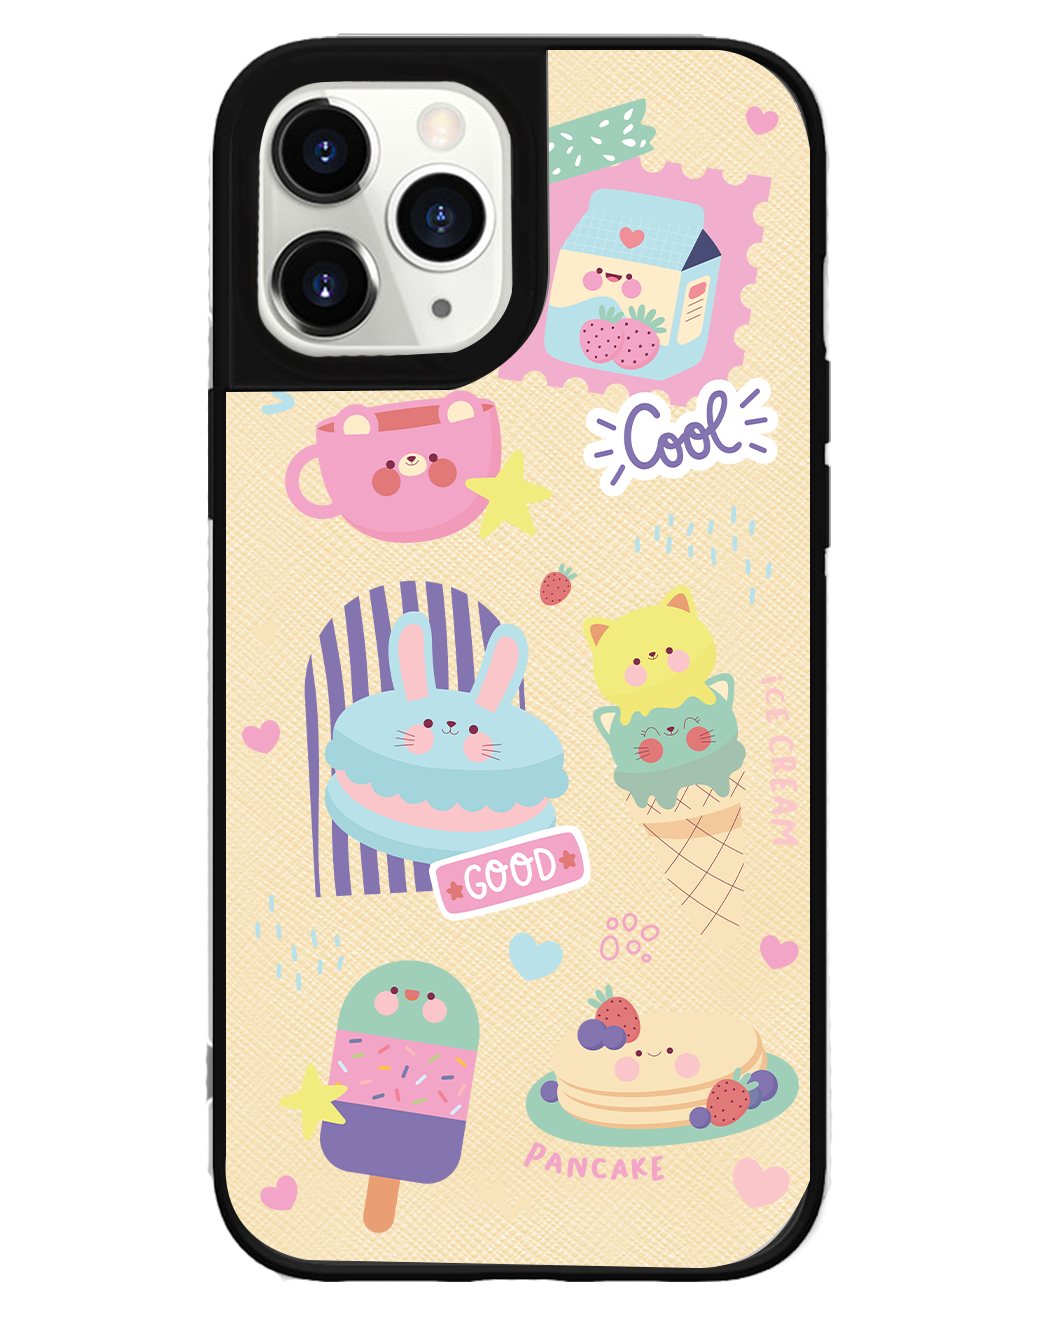 iPhone Leather Grip Case - Sweet Cafe